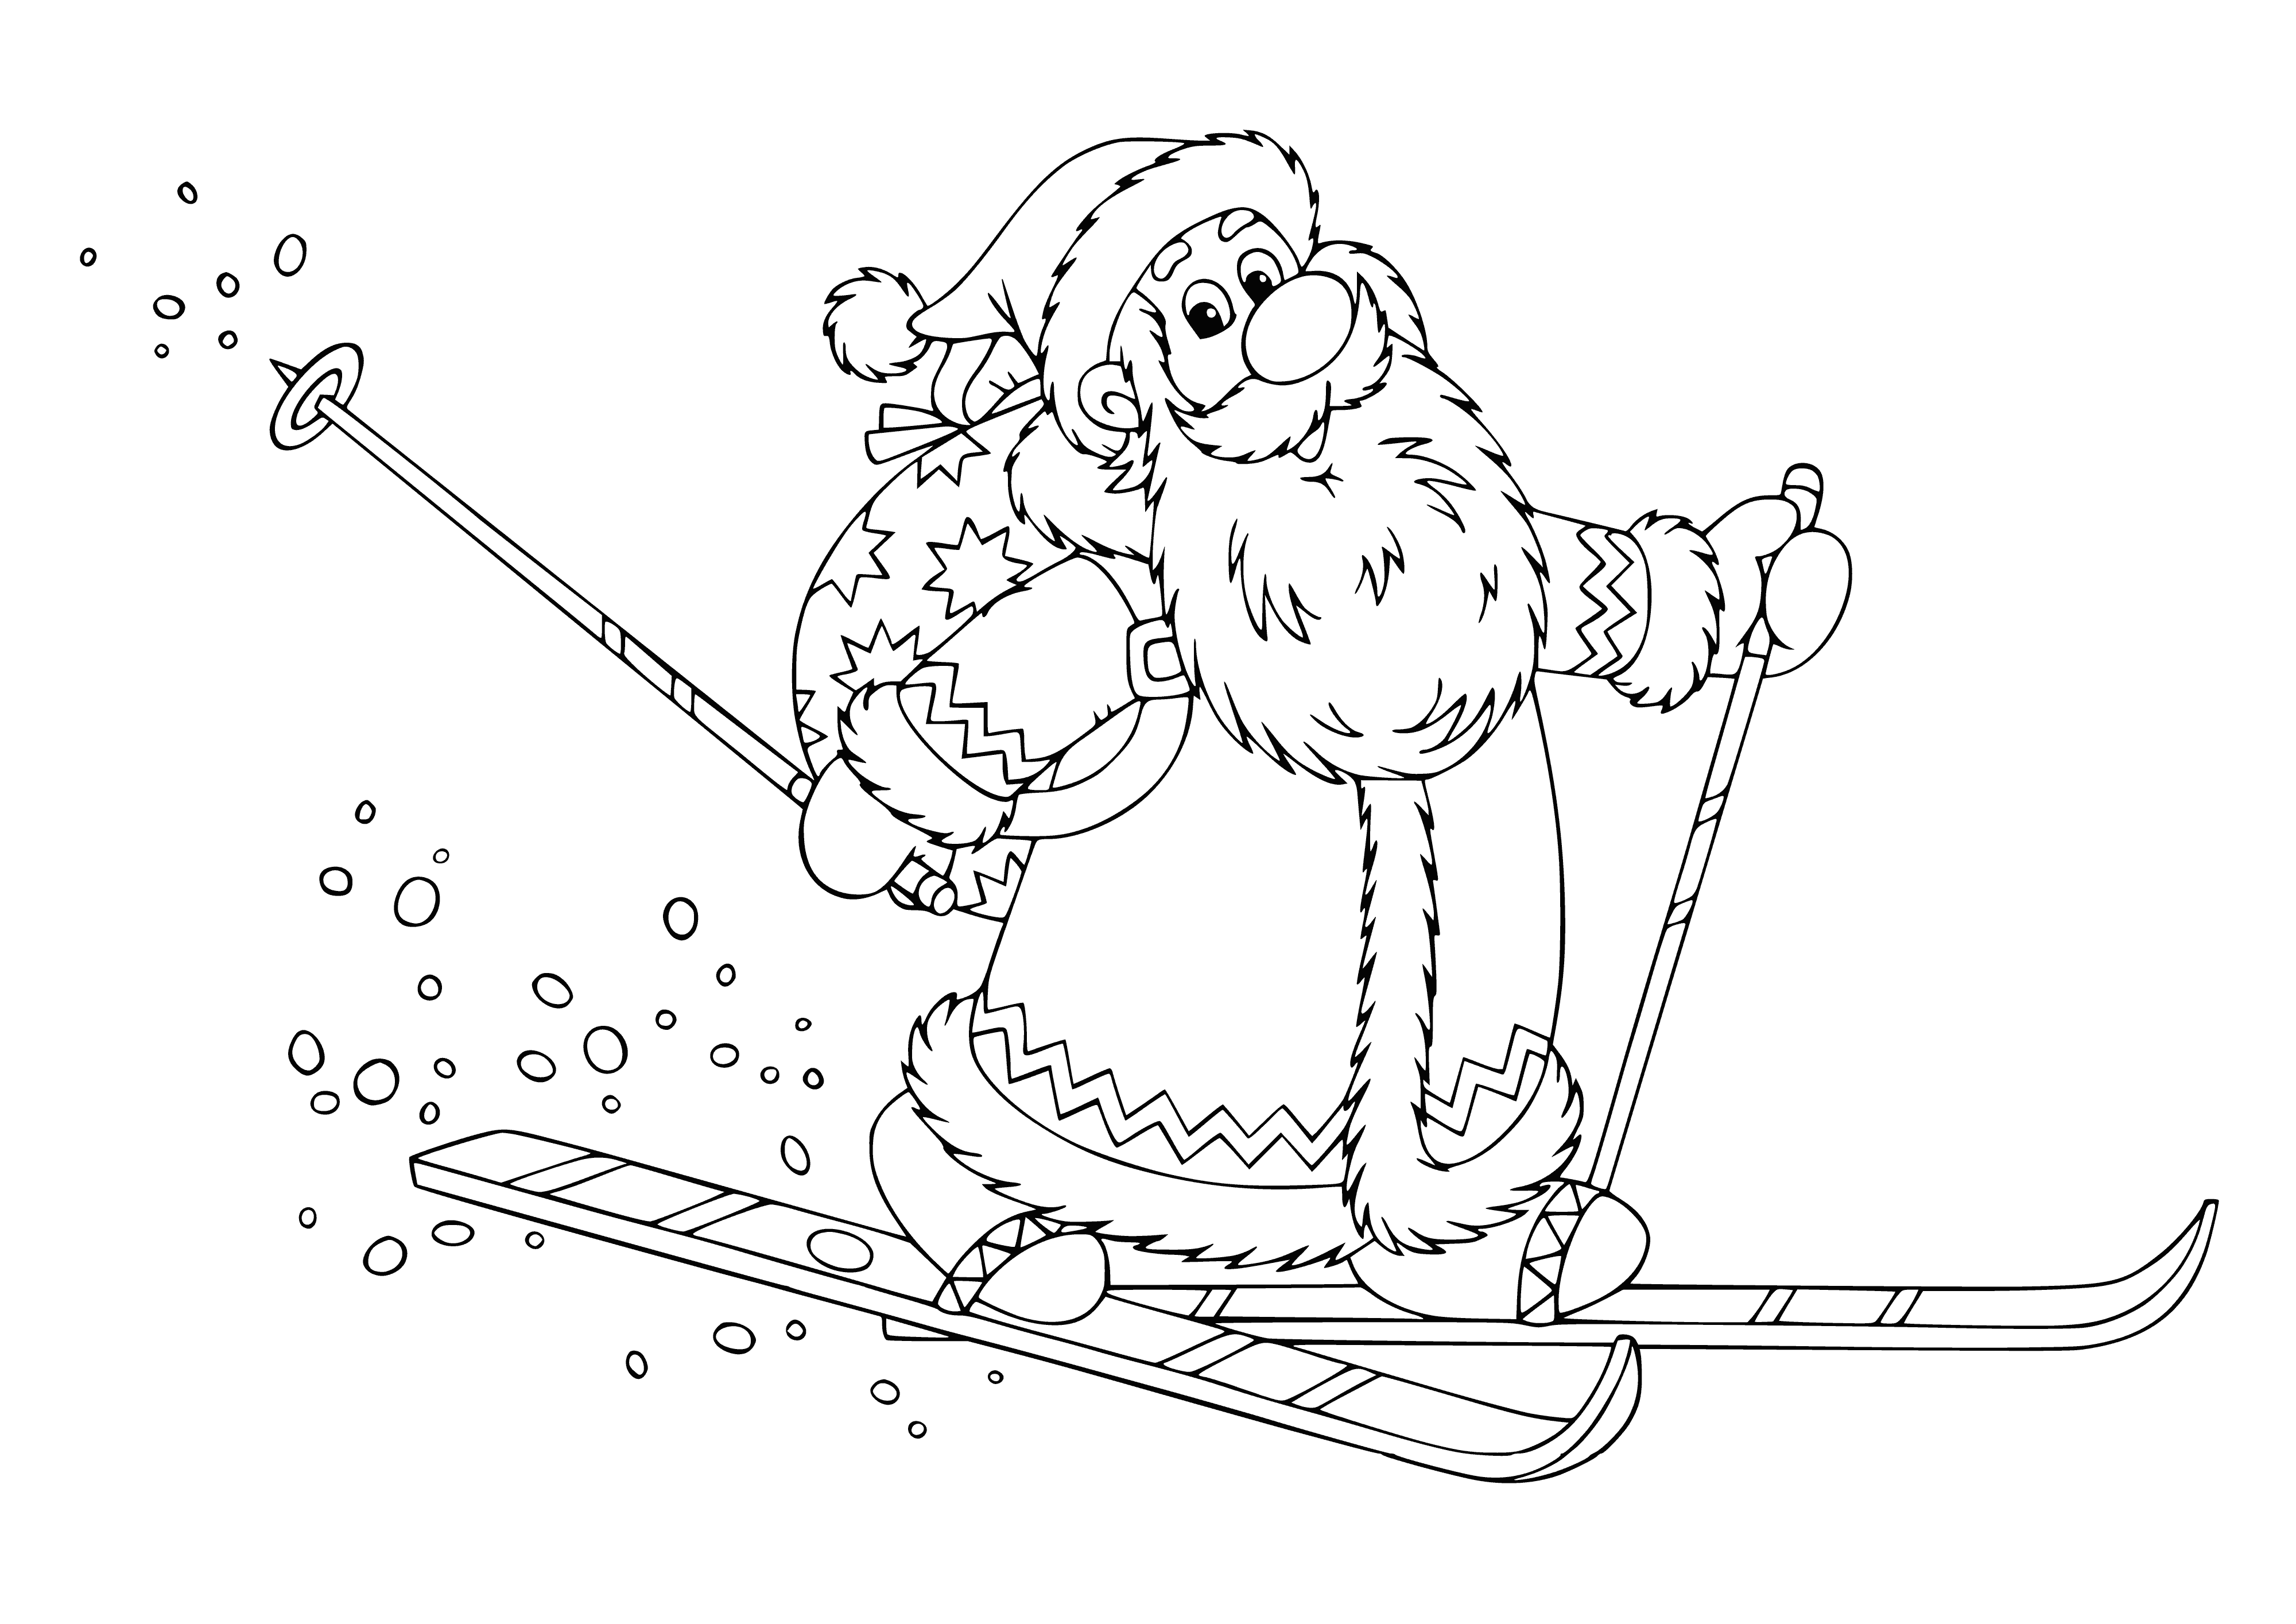 coloring page: Santa Claus skis down a hill with presents, wearing a red & white suit and white beard & scarf.